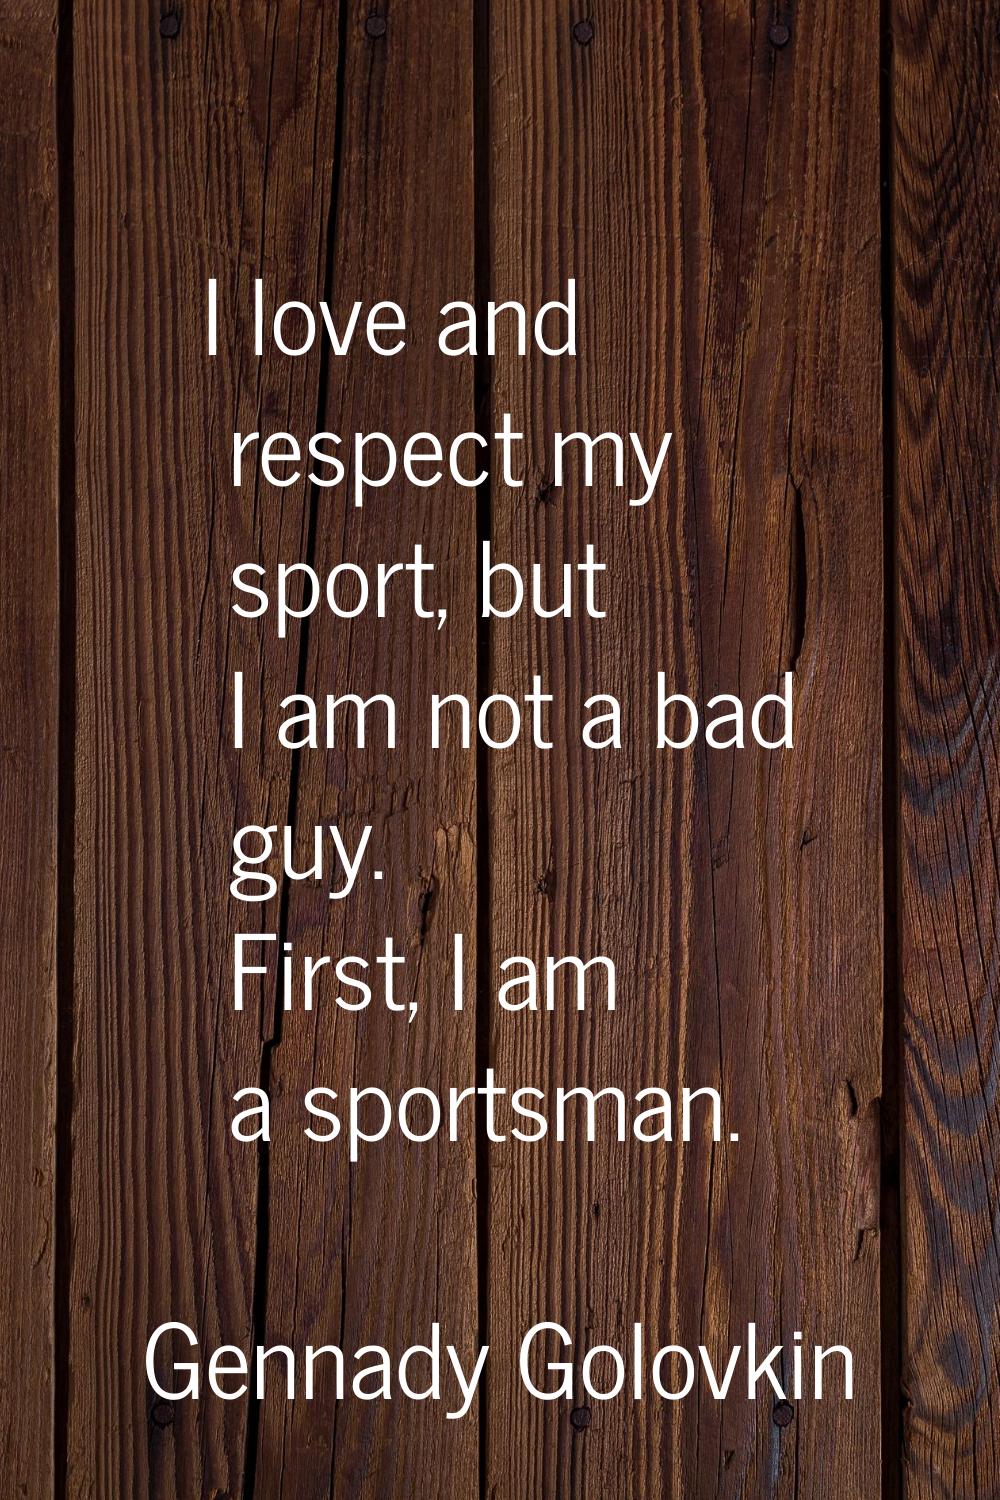 I love and respect my sport, but I am not a bad guy. First, I am a sportsman.